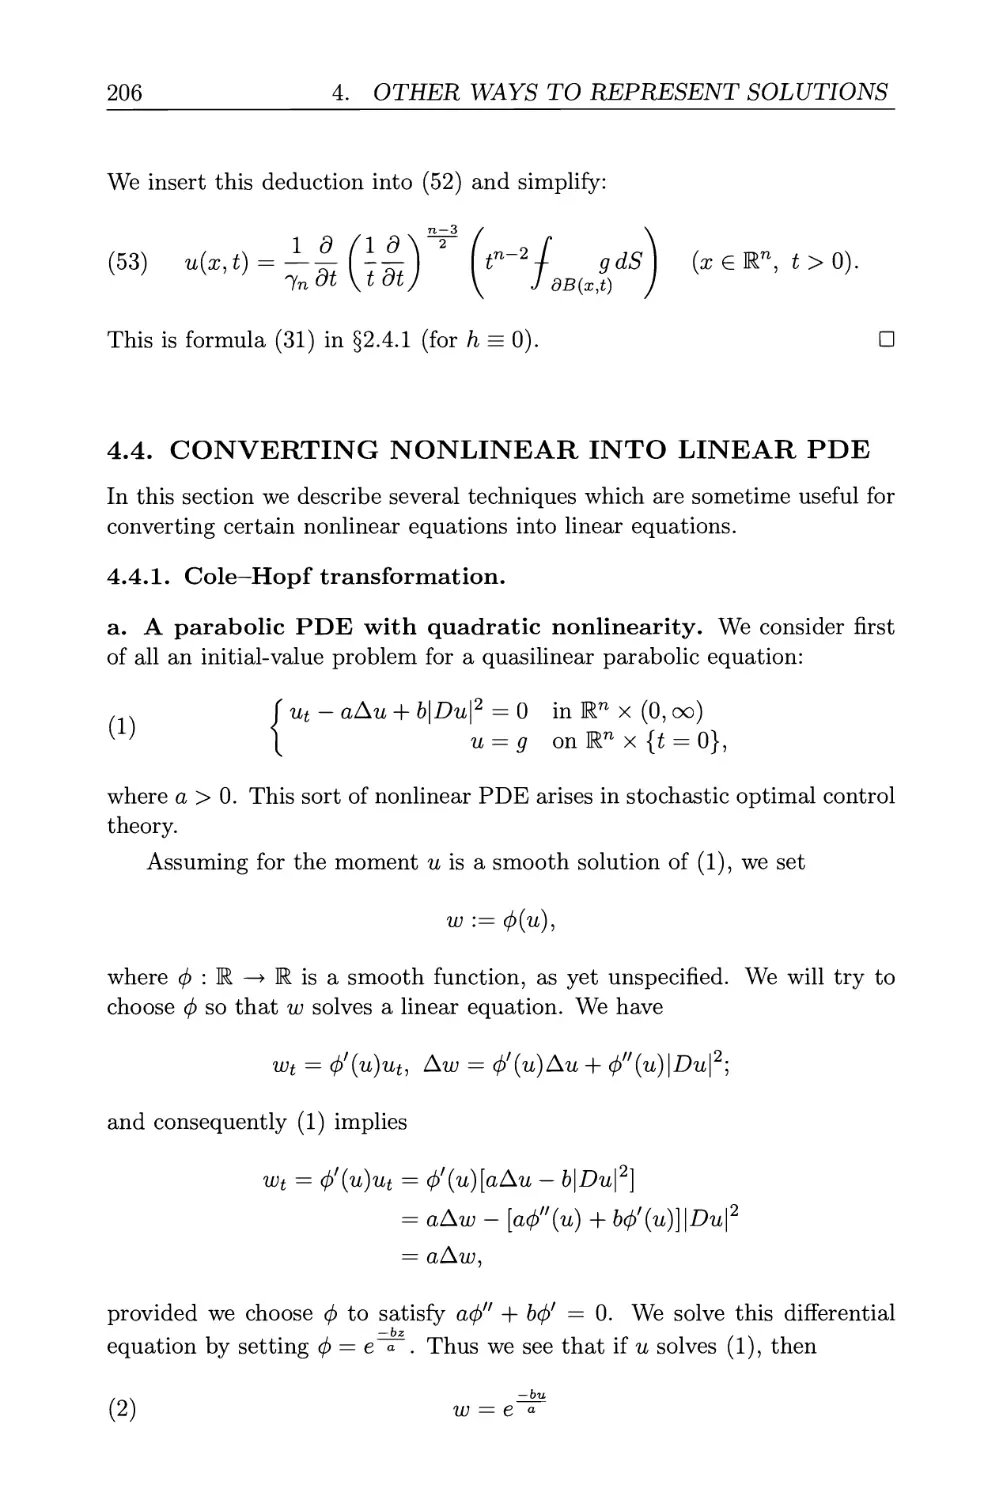 4.4. Converting nonlinear into linear PDE